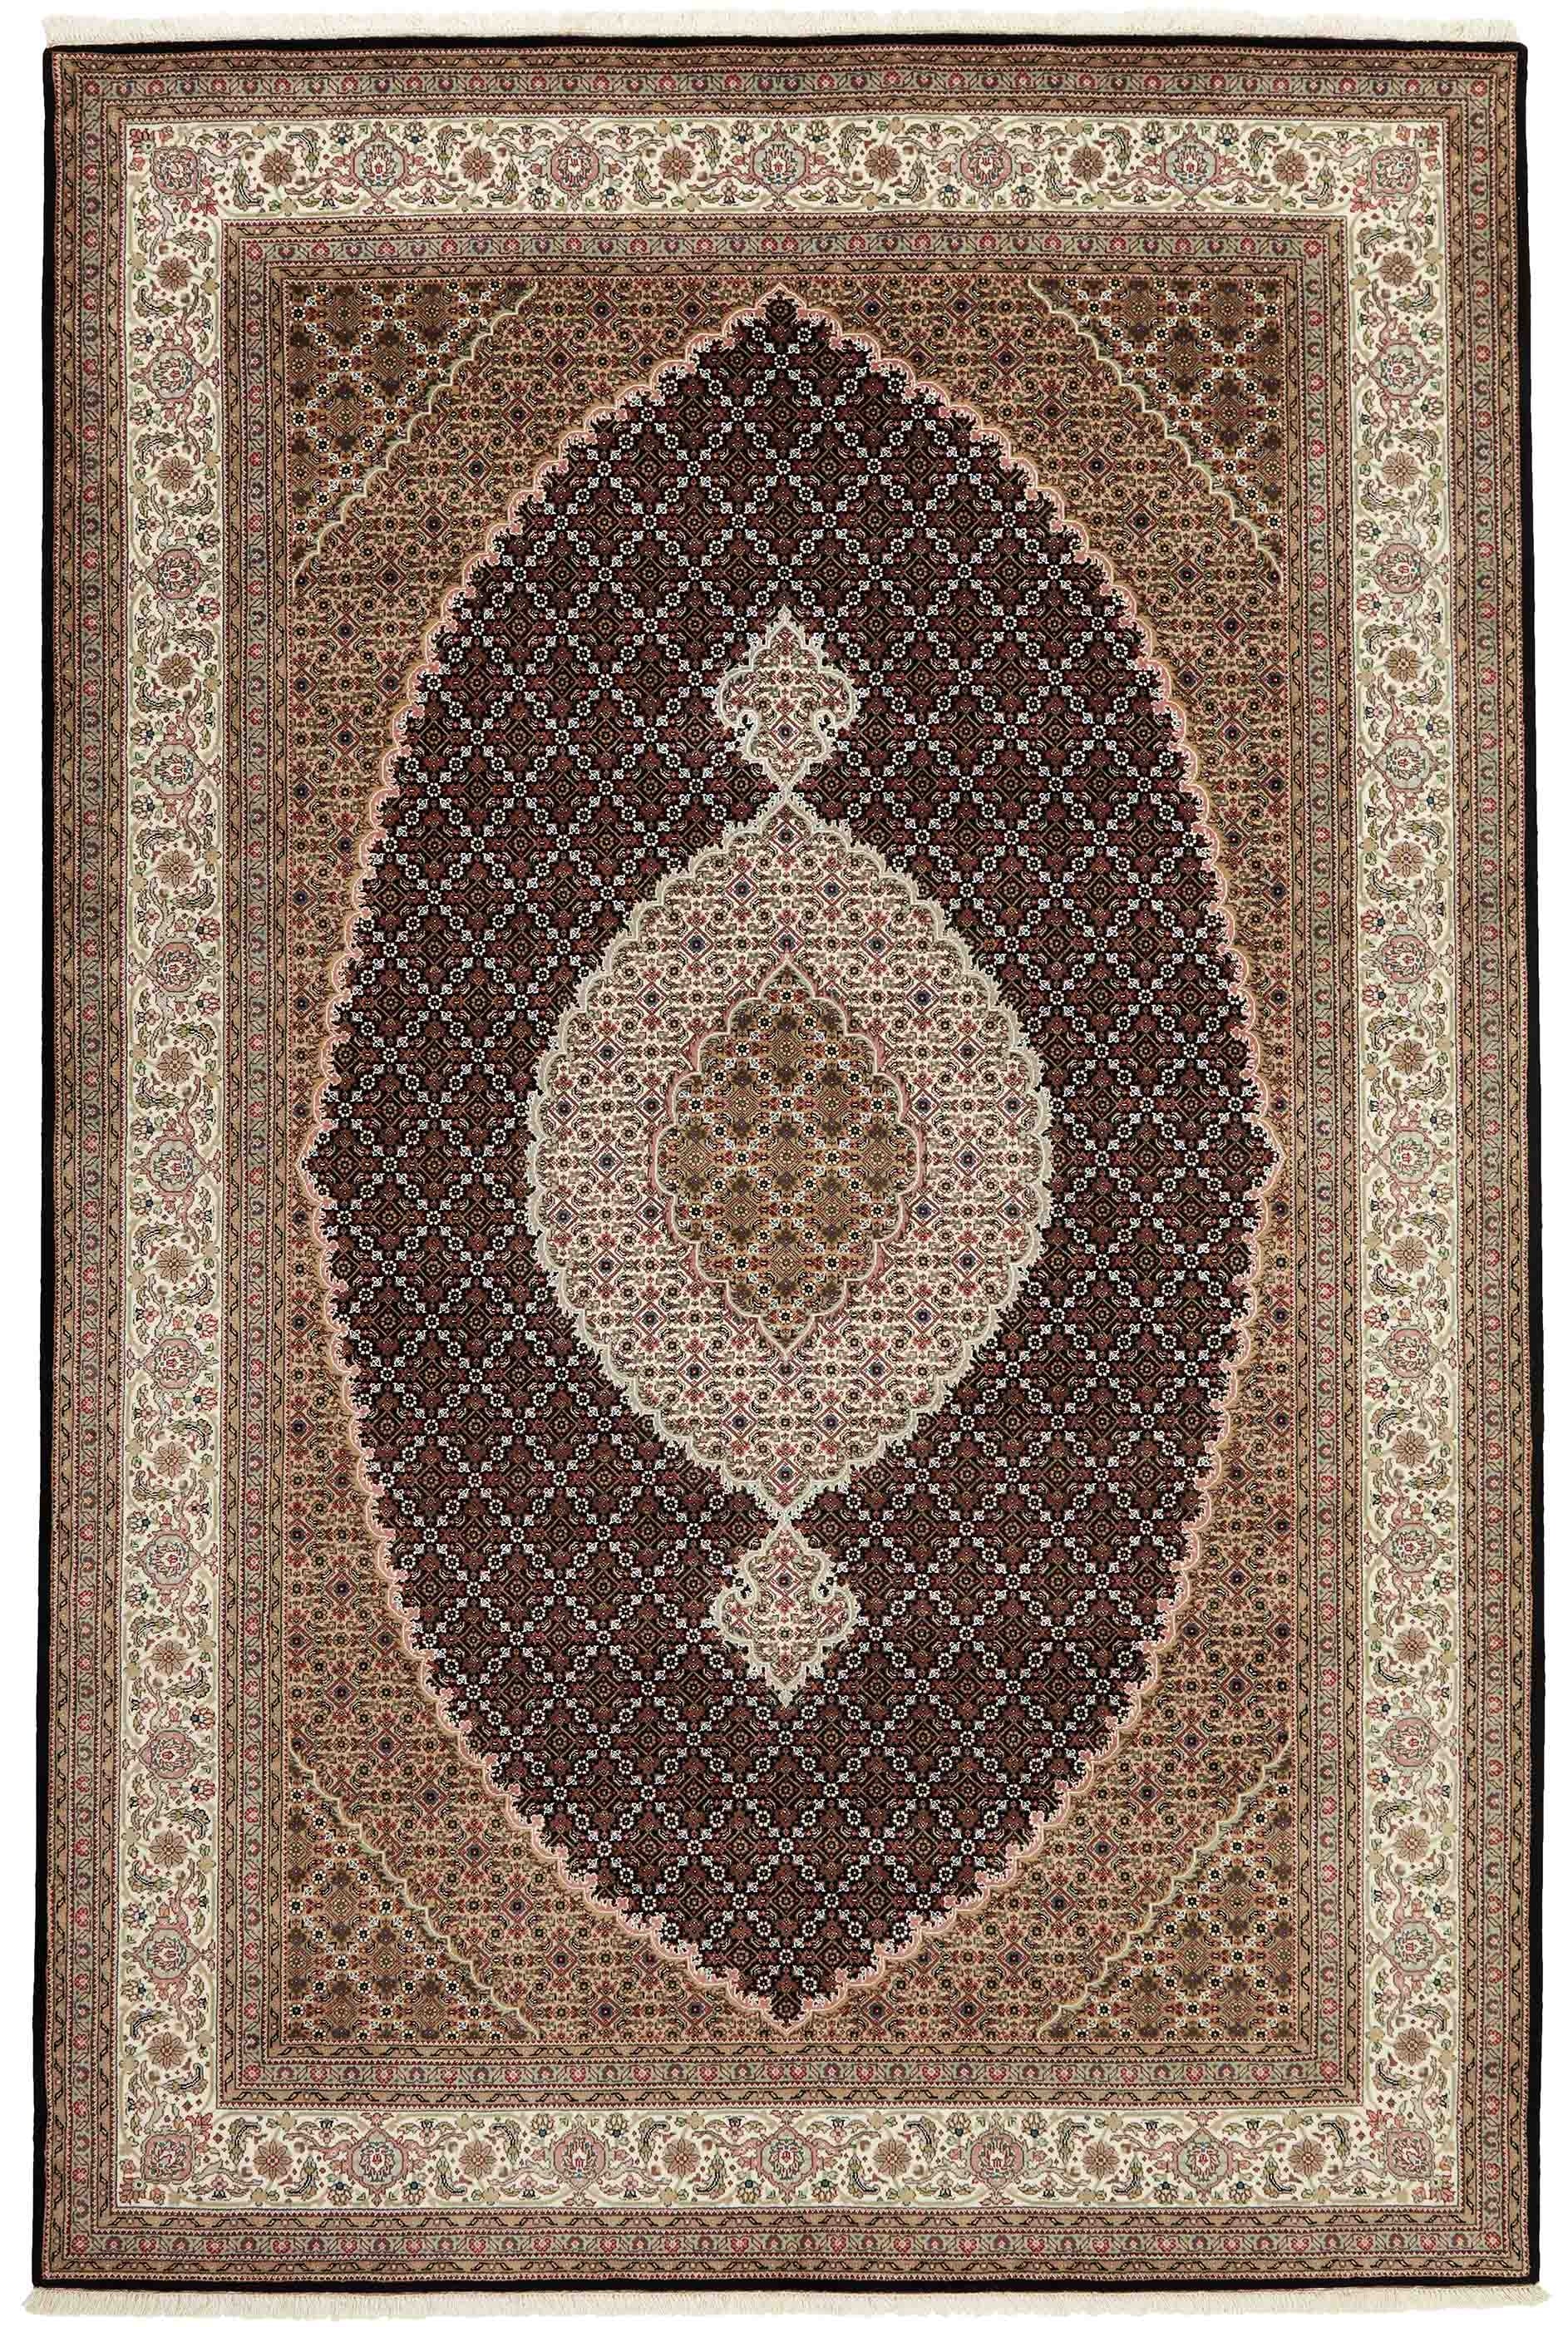 Authentic Oriental rug with traditional geometric and floral design in red, blue, green, beige, brown and black